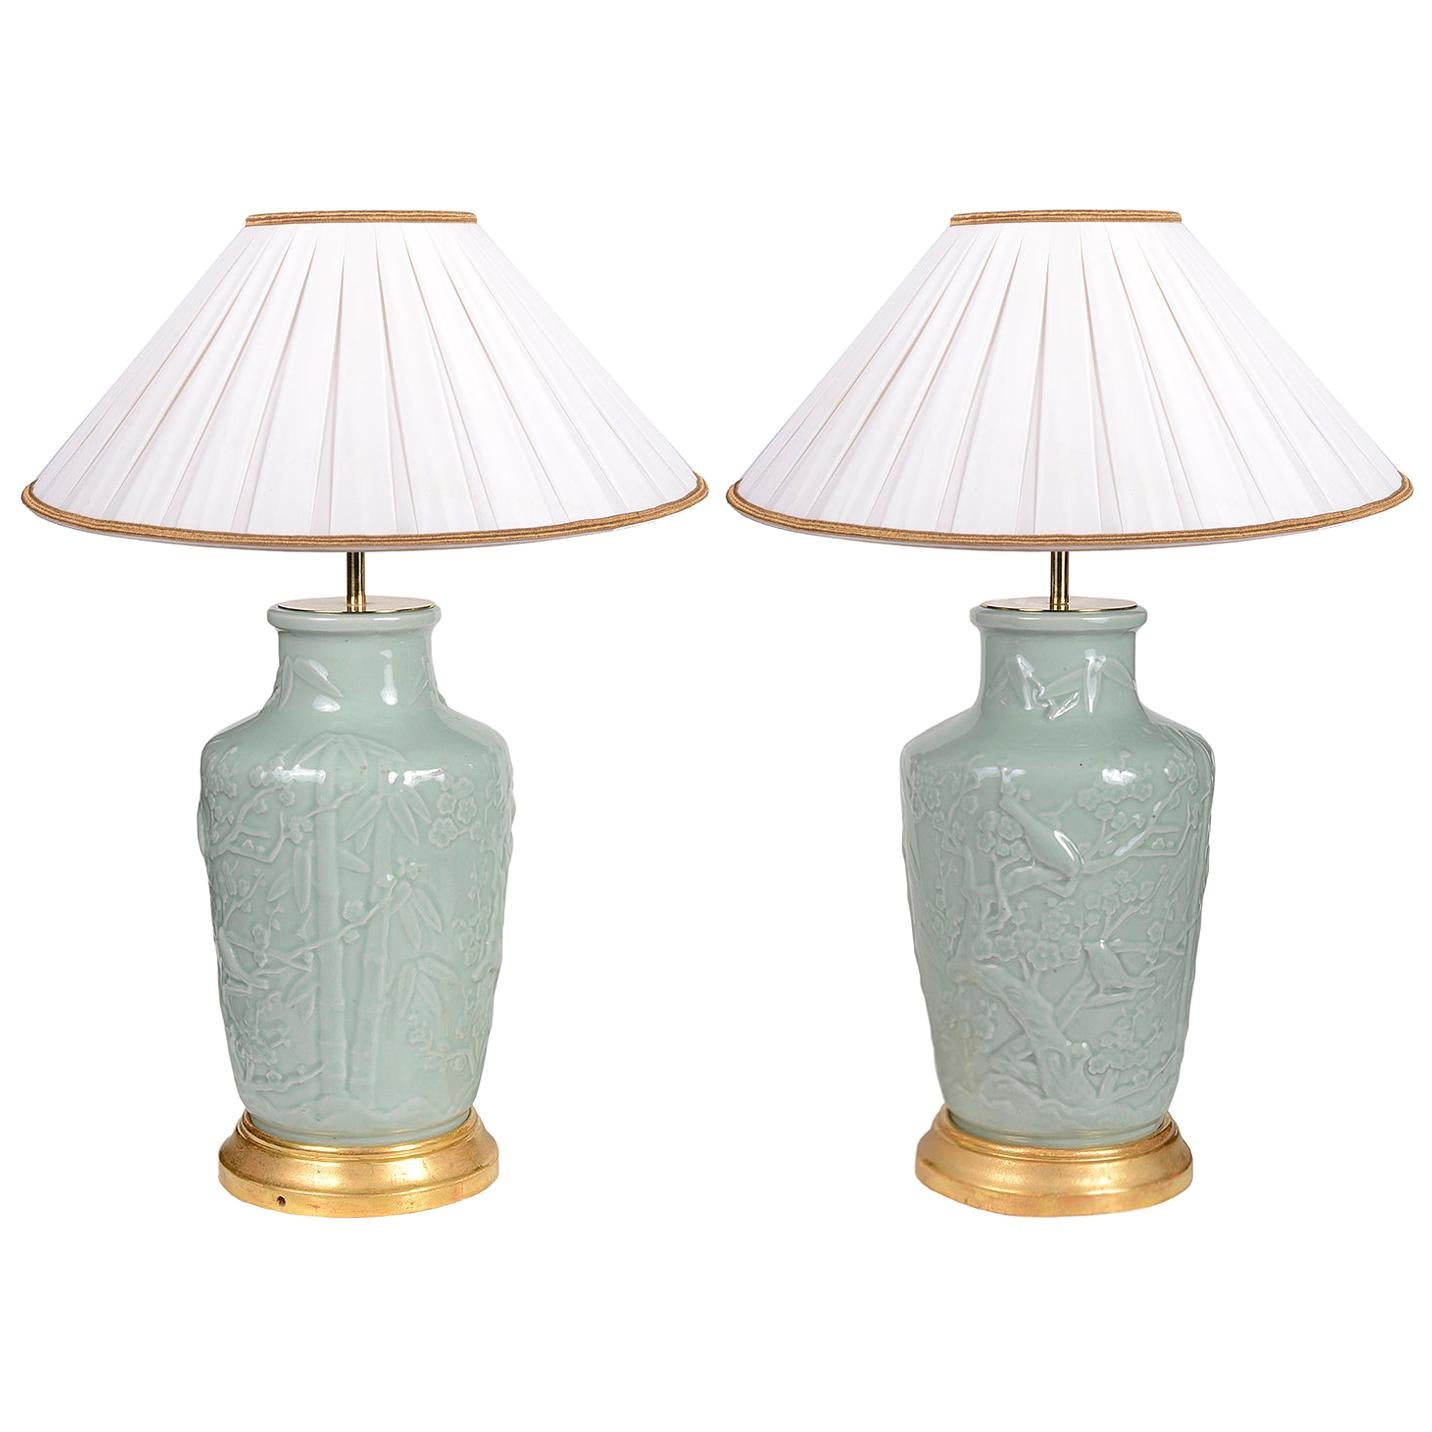 Pair of Chinese Celedon Porcelain Vases / Lamps, circa 1900